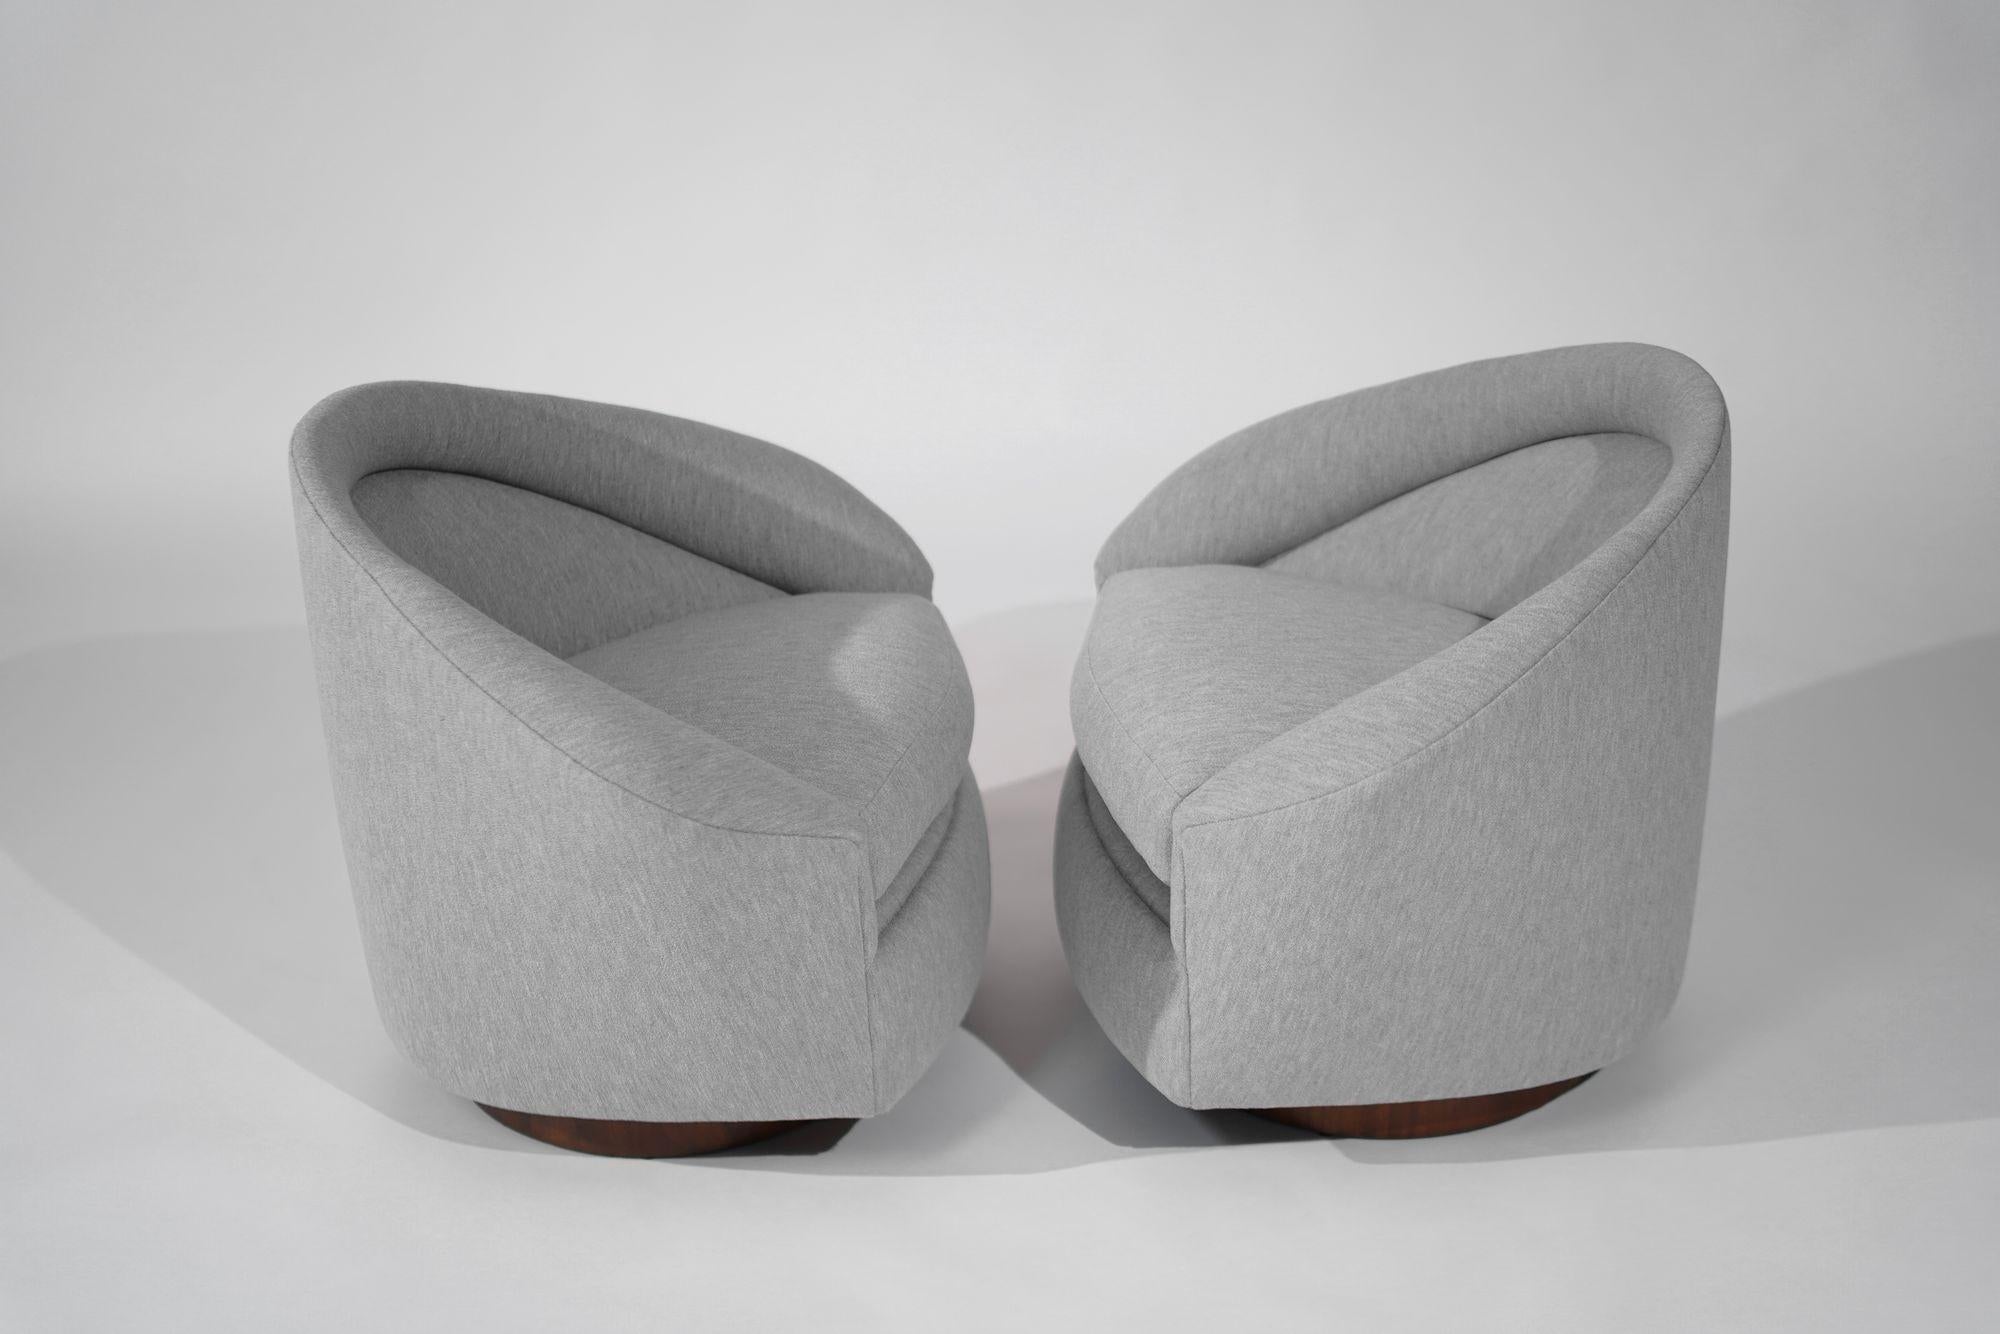 Craft Associates presents a rare find: a set of restored Adrian Pearsall swivel lounge chairs from the 1950s. Upholstered in luxurious gray boucle by Holly Hunt, these chairs swivel and tilt for comfort and versatility. The walnut support has been